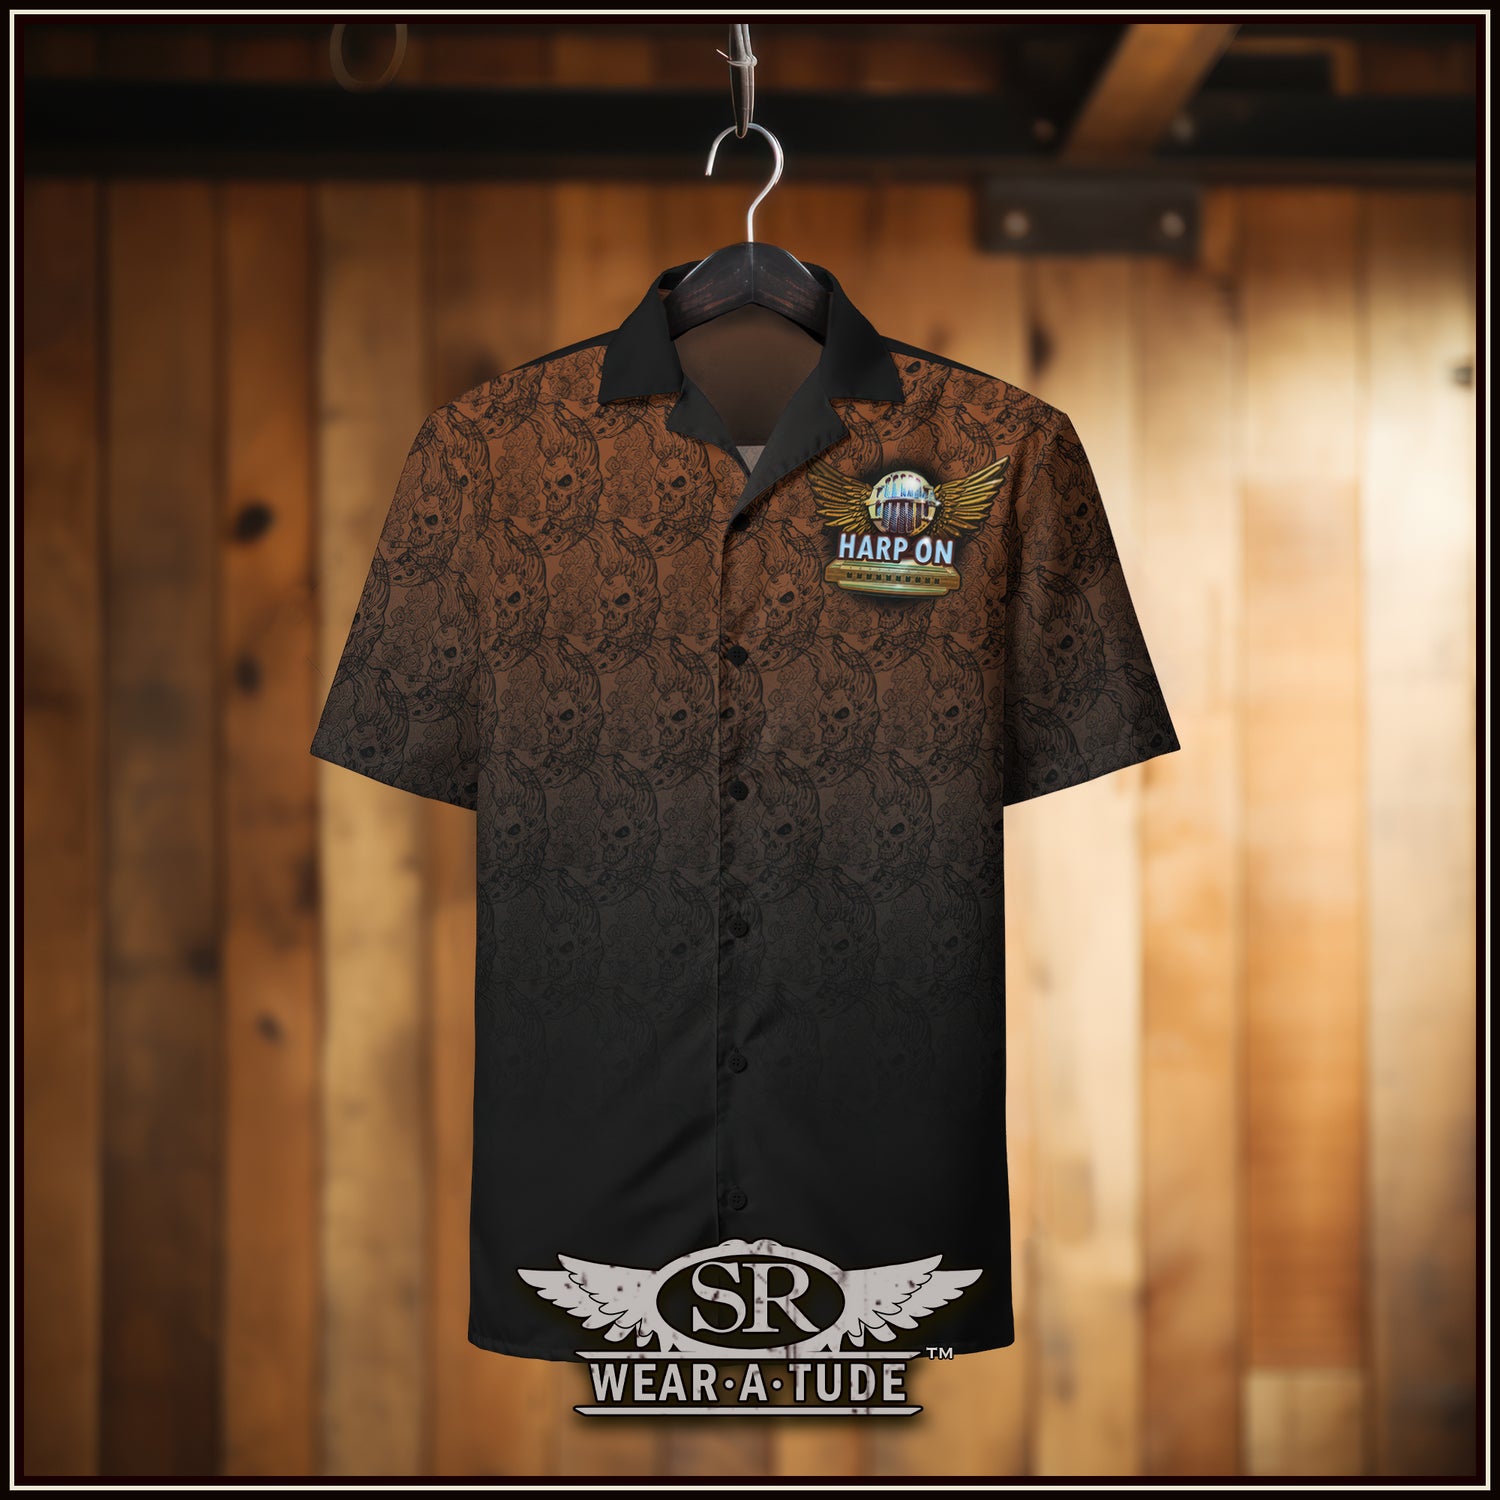 Our Harp On brand looks slick on this killer button up short sleeve shirt. The signature style graphics is evident with the Smoking Moon-skull pattern on a rich deep sienna brown, trimmed with a charcoal trim. 